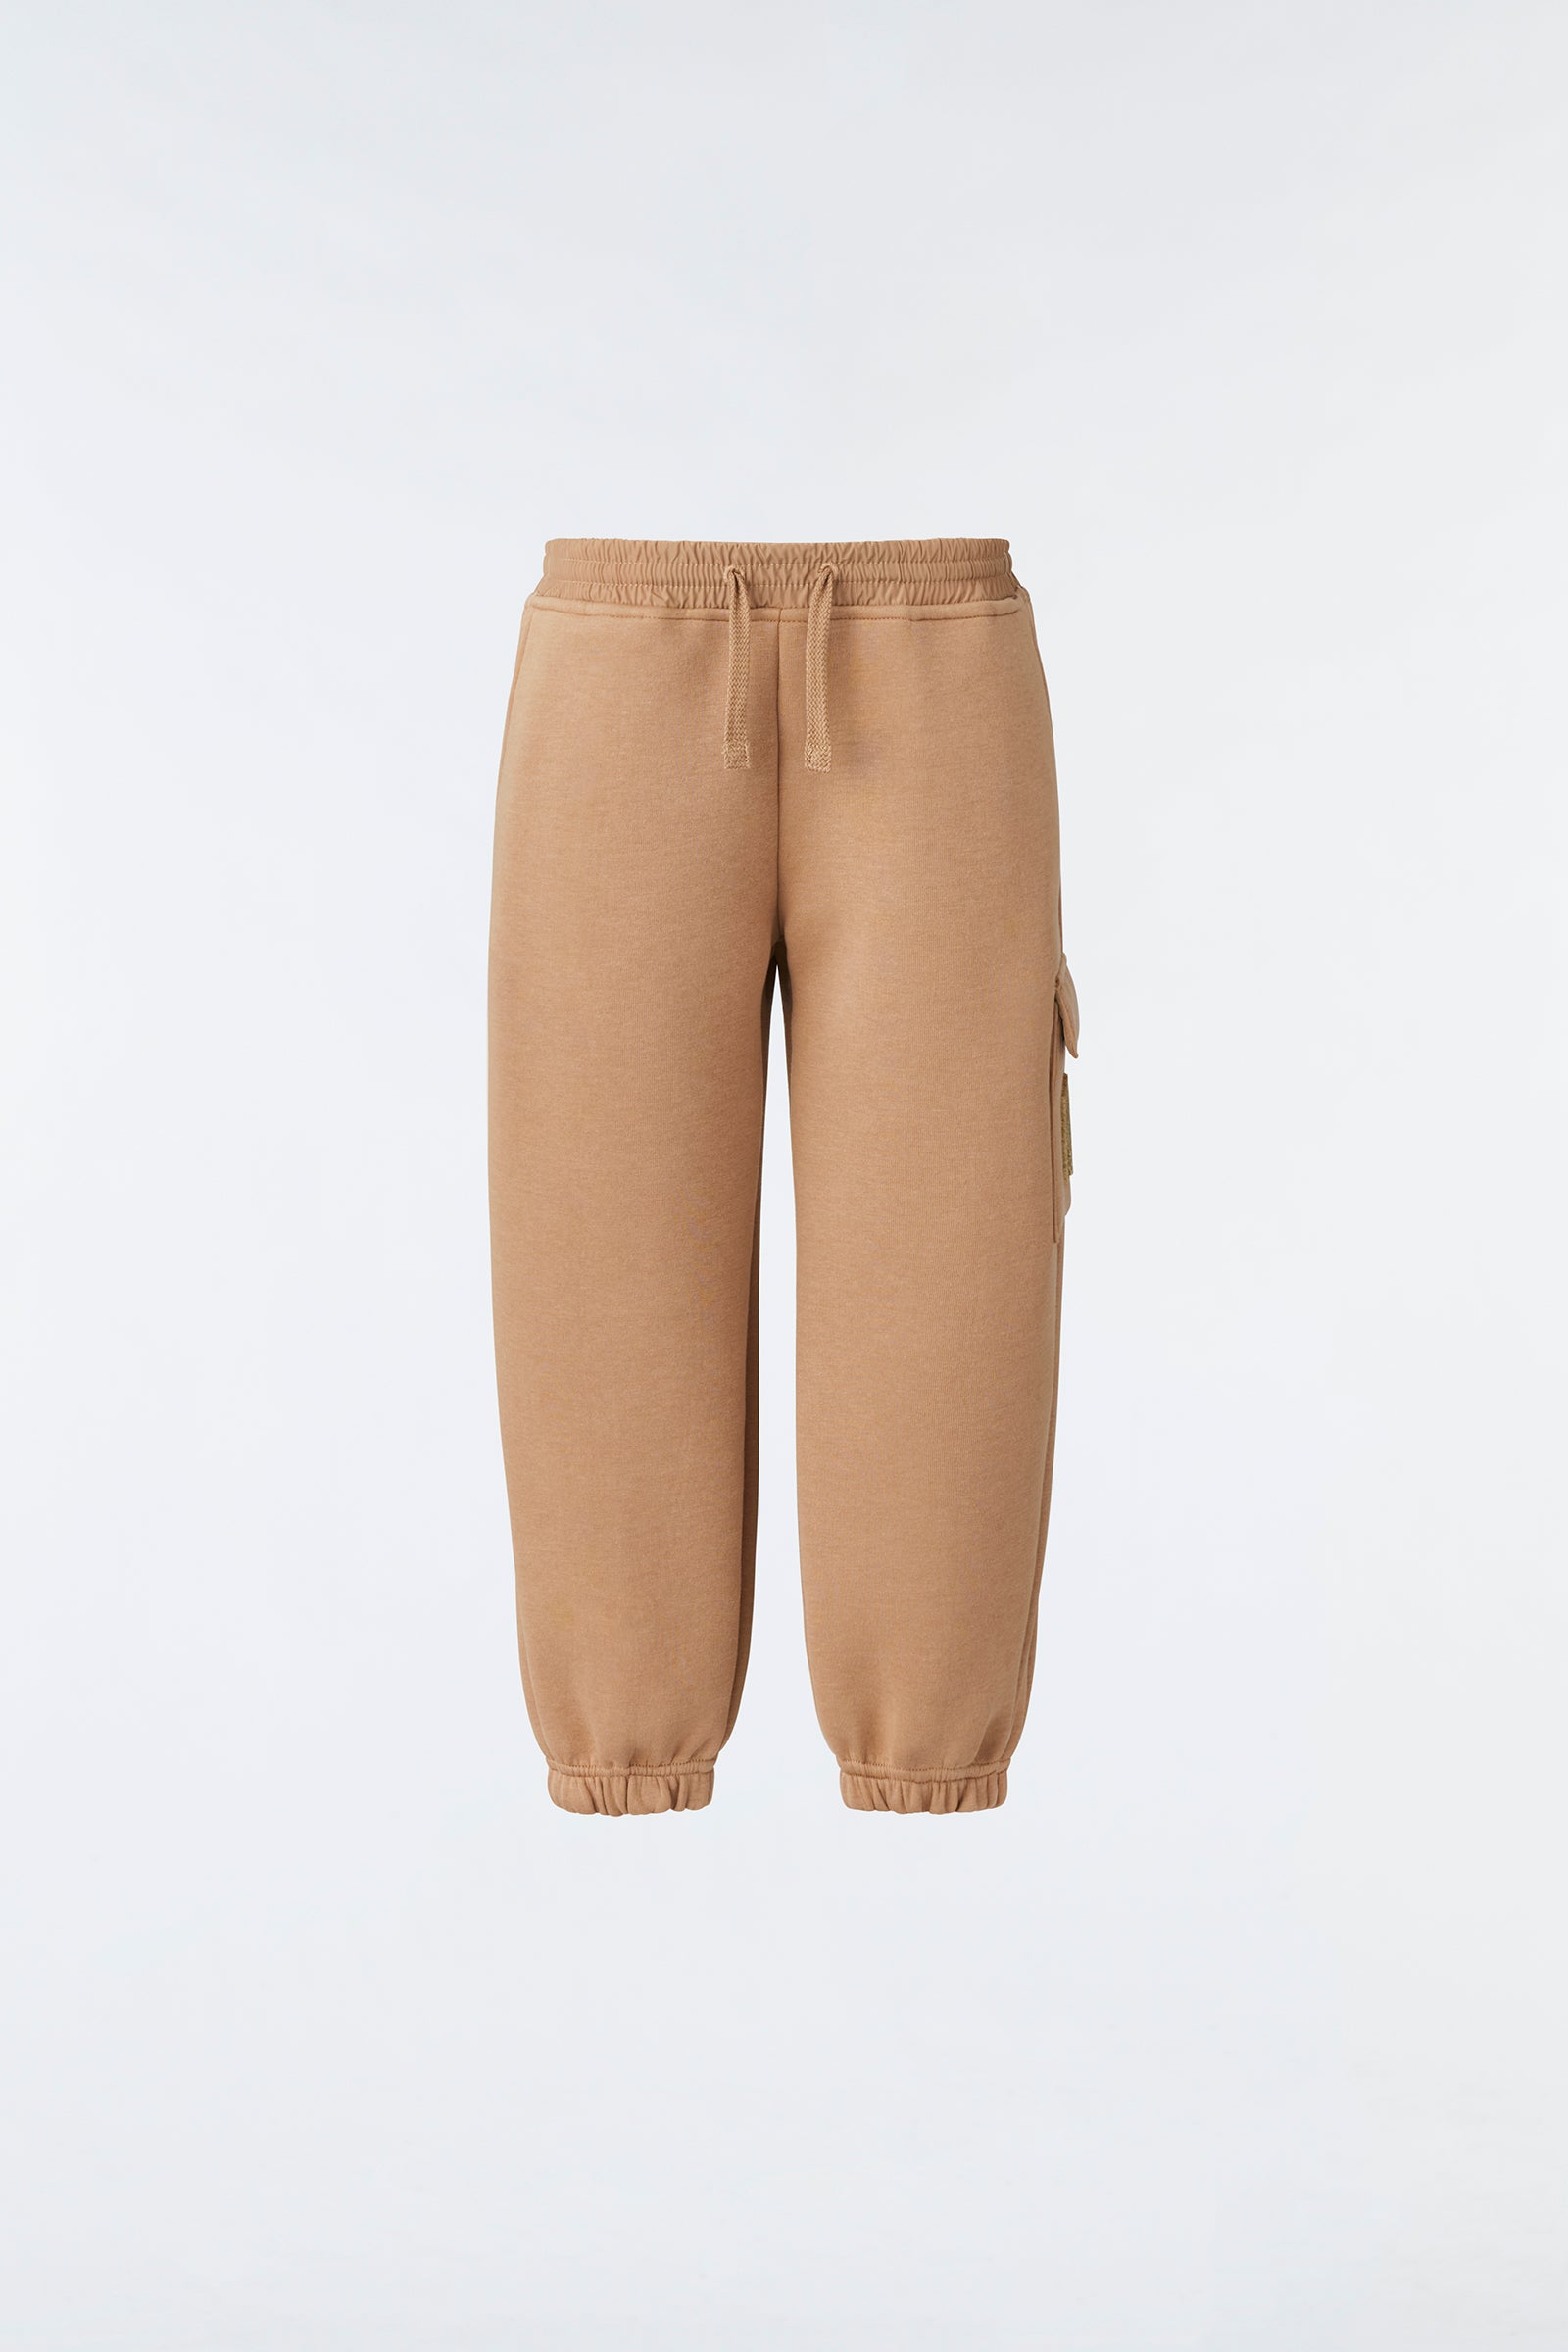 Zippered Side Pocket Joggers in Camel - Retro, Indie and Unique Fashion